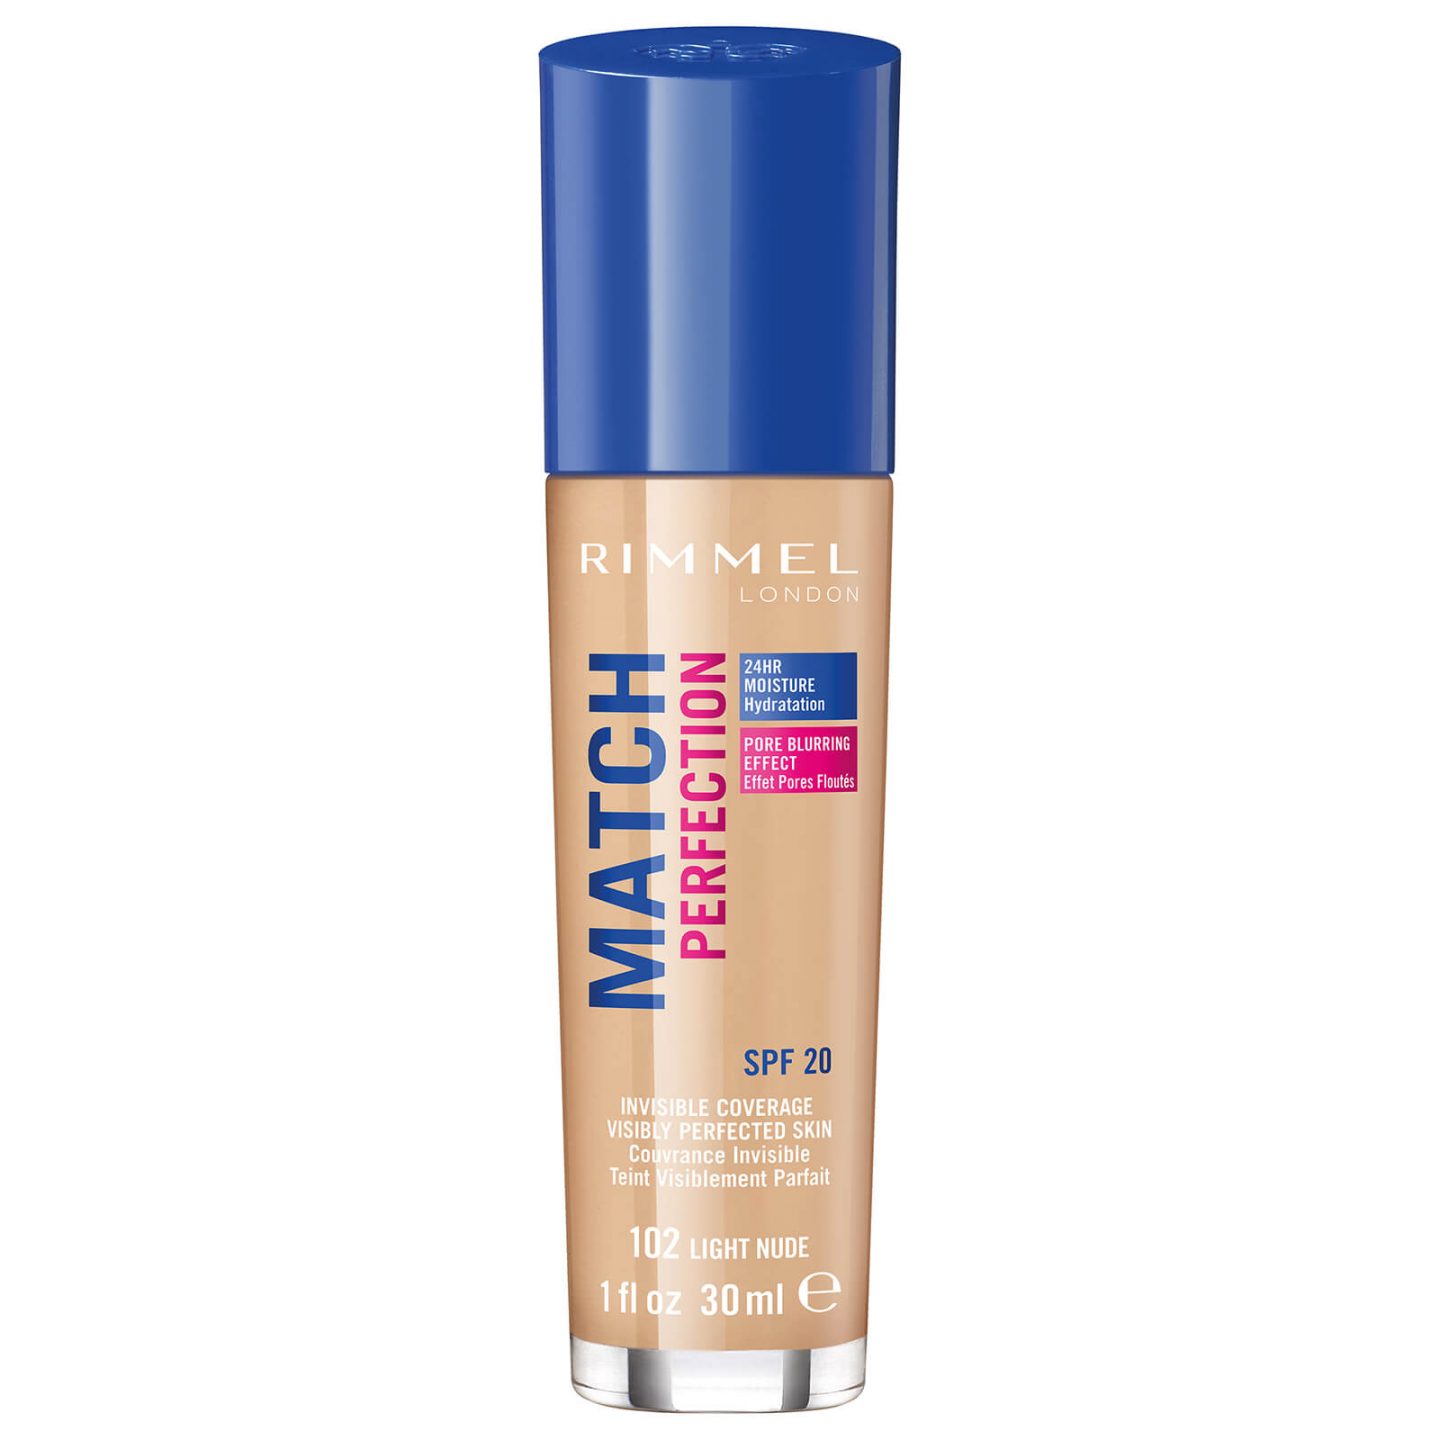 Rimmel Match Perfection Foundation in bottle 30ml. Glass bottle with blue top. 